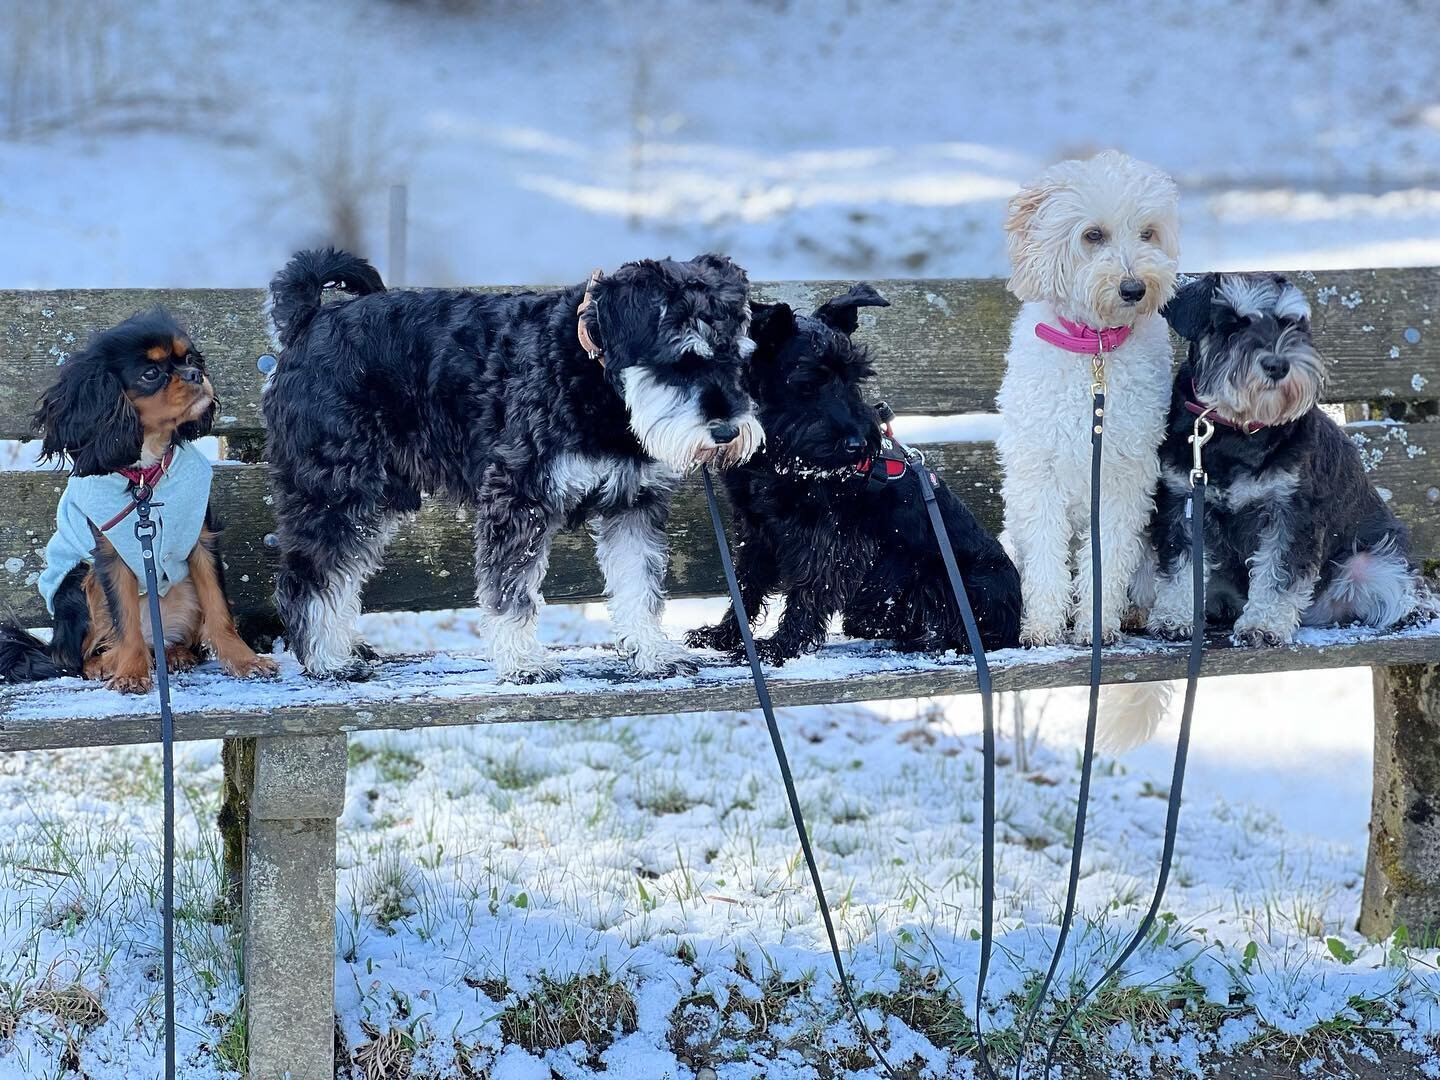 HAPPY SPRING🤍🤣for us there is nothing better than exploring the world with our packs together in different ways every day..even when we find some snow in spring😅🤍

#snow #spring #switzerland #dogdaycare #daycare #adventure #explore #together #pas